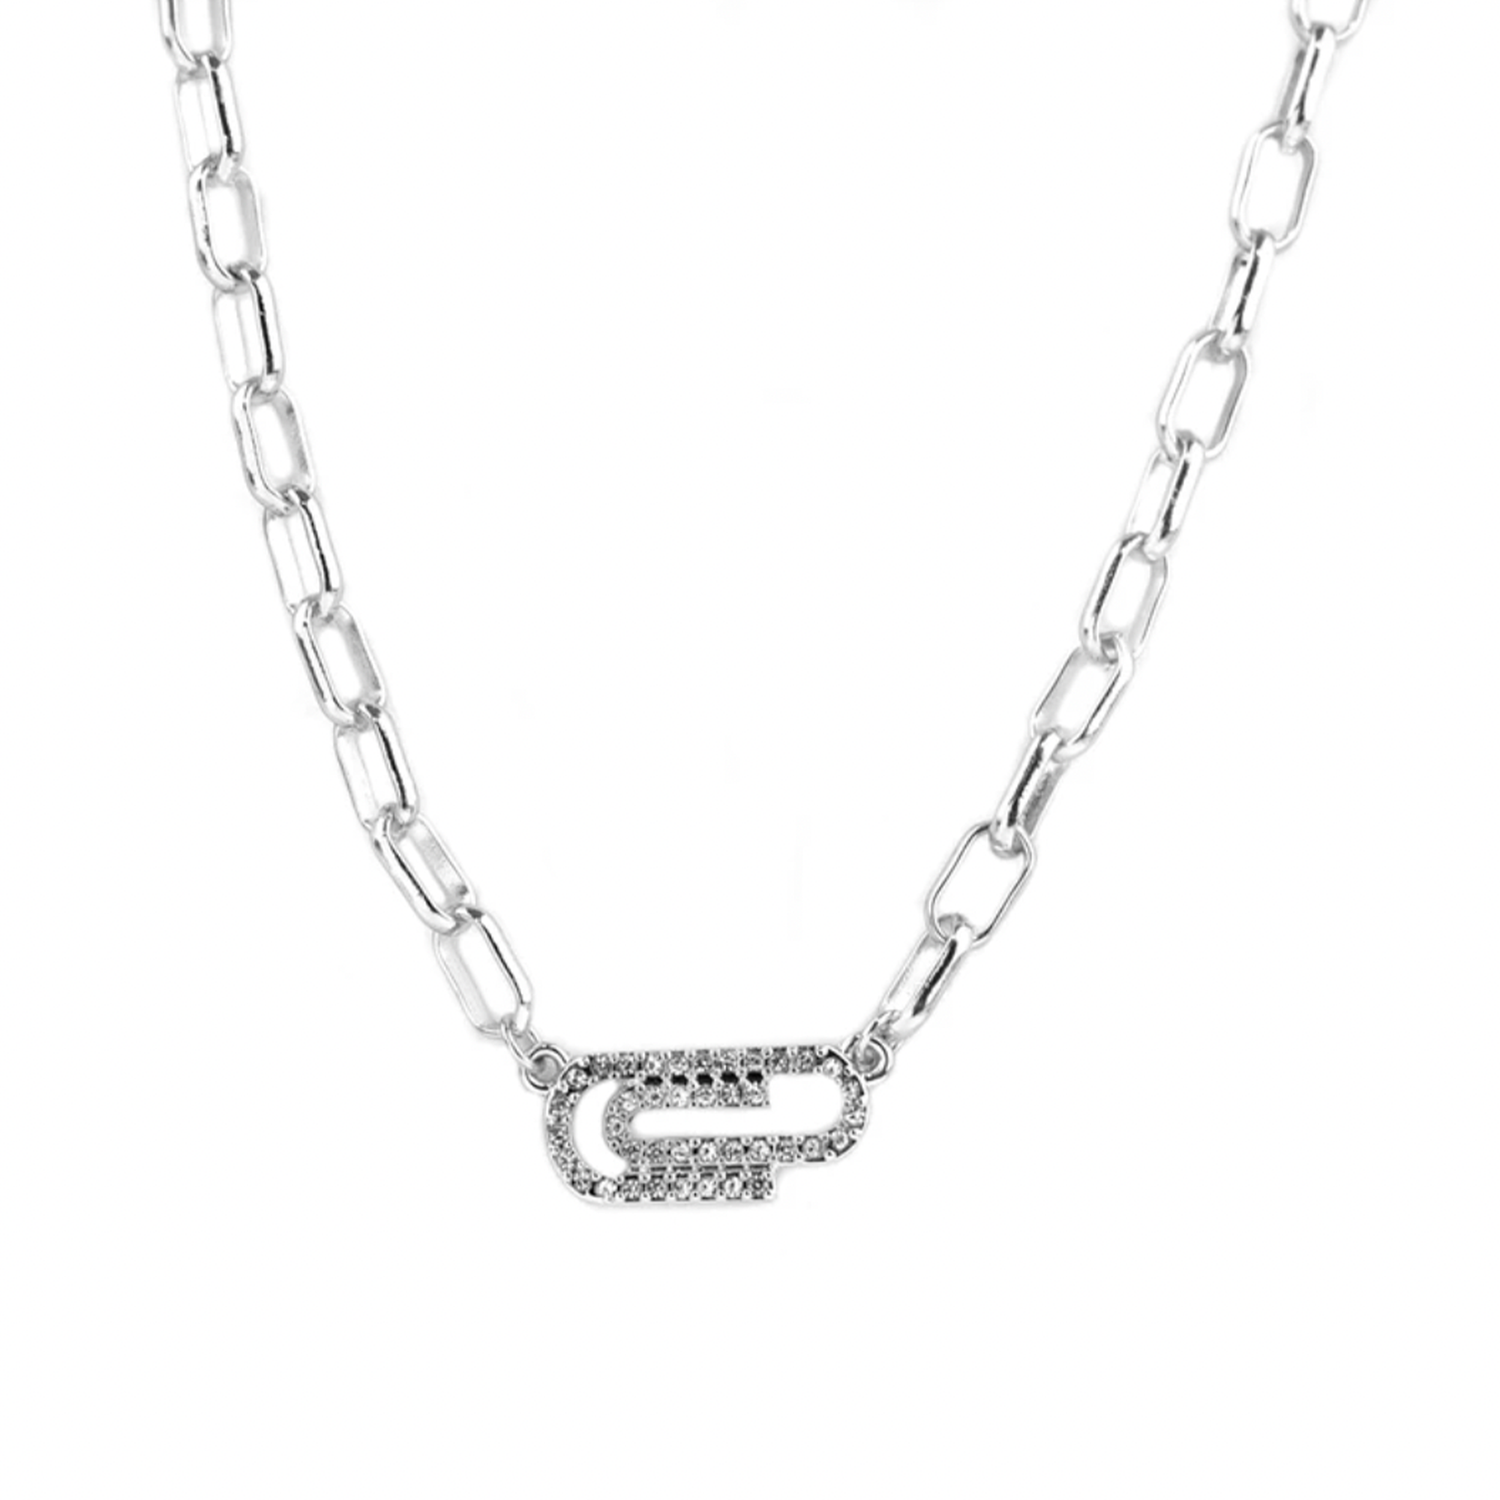 Marlyn Schiff Paperclip Necklace. Metal link necklace with pave paperclip design